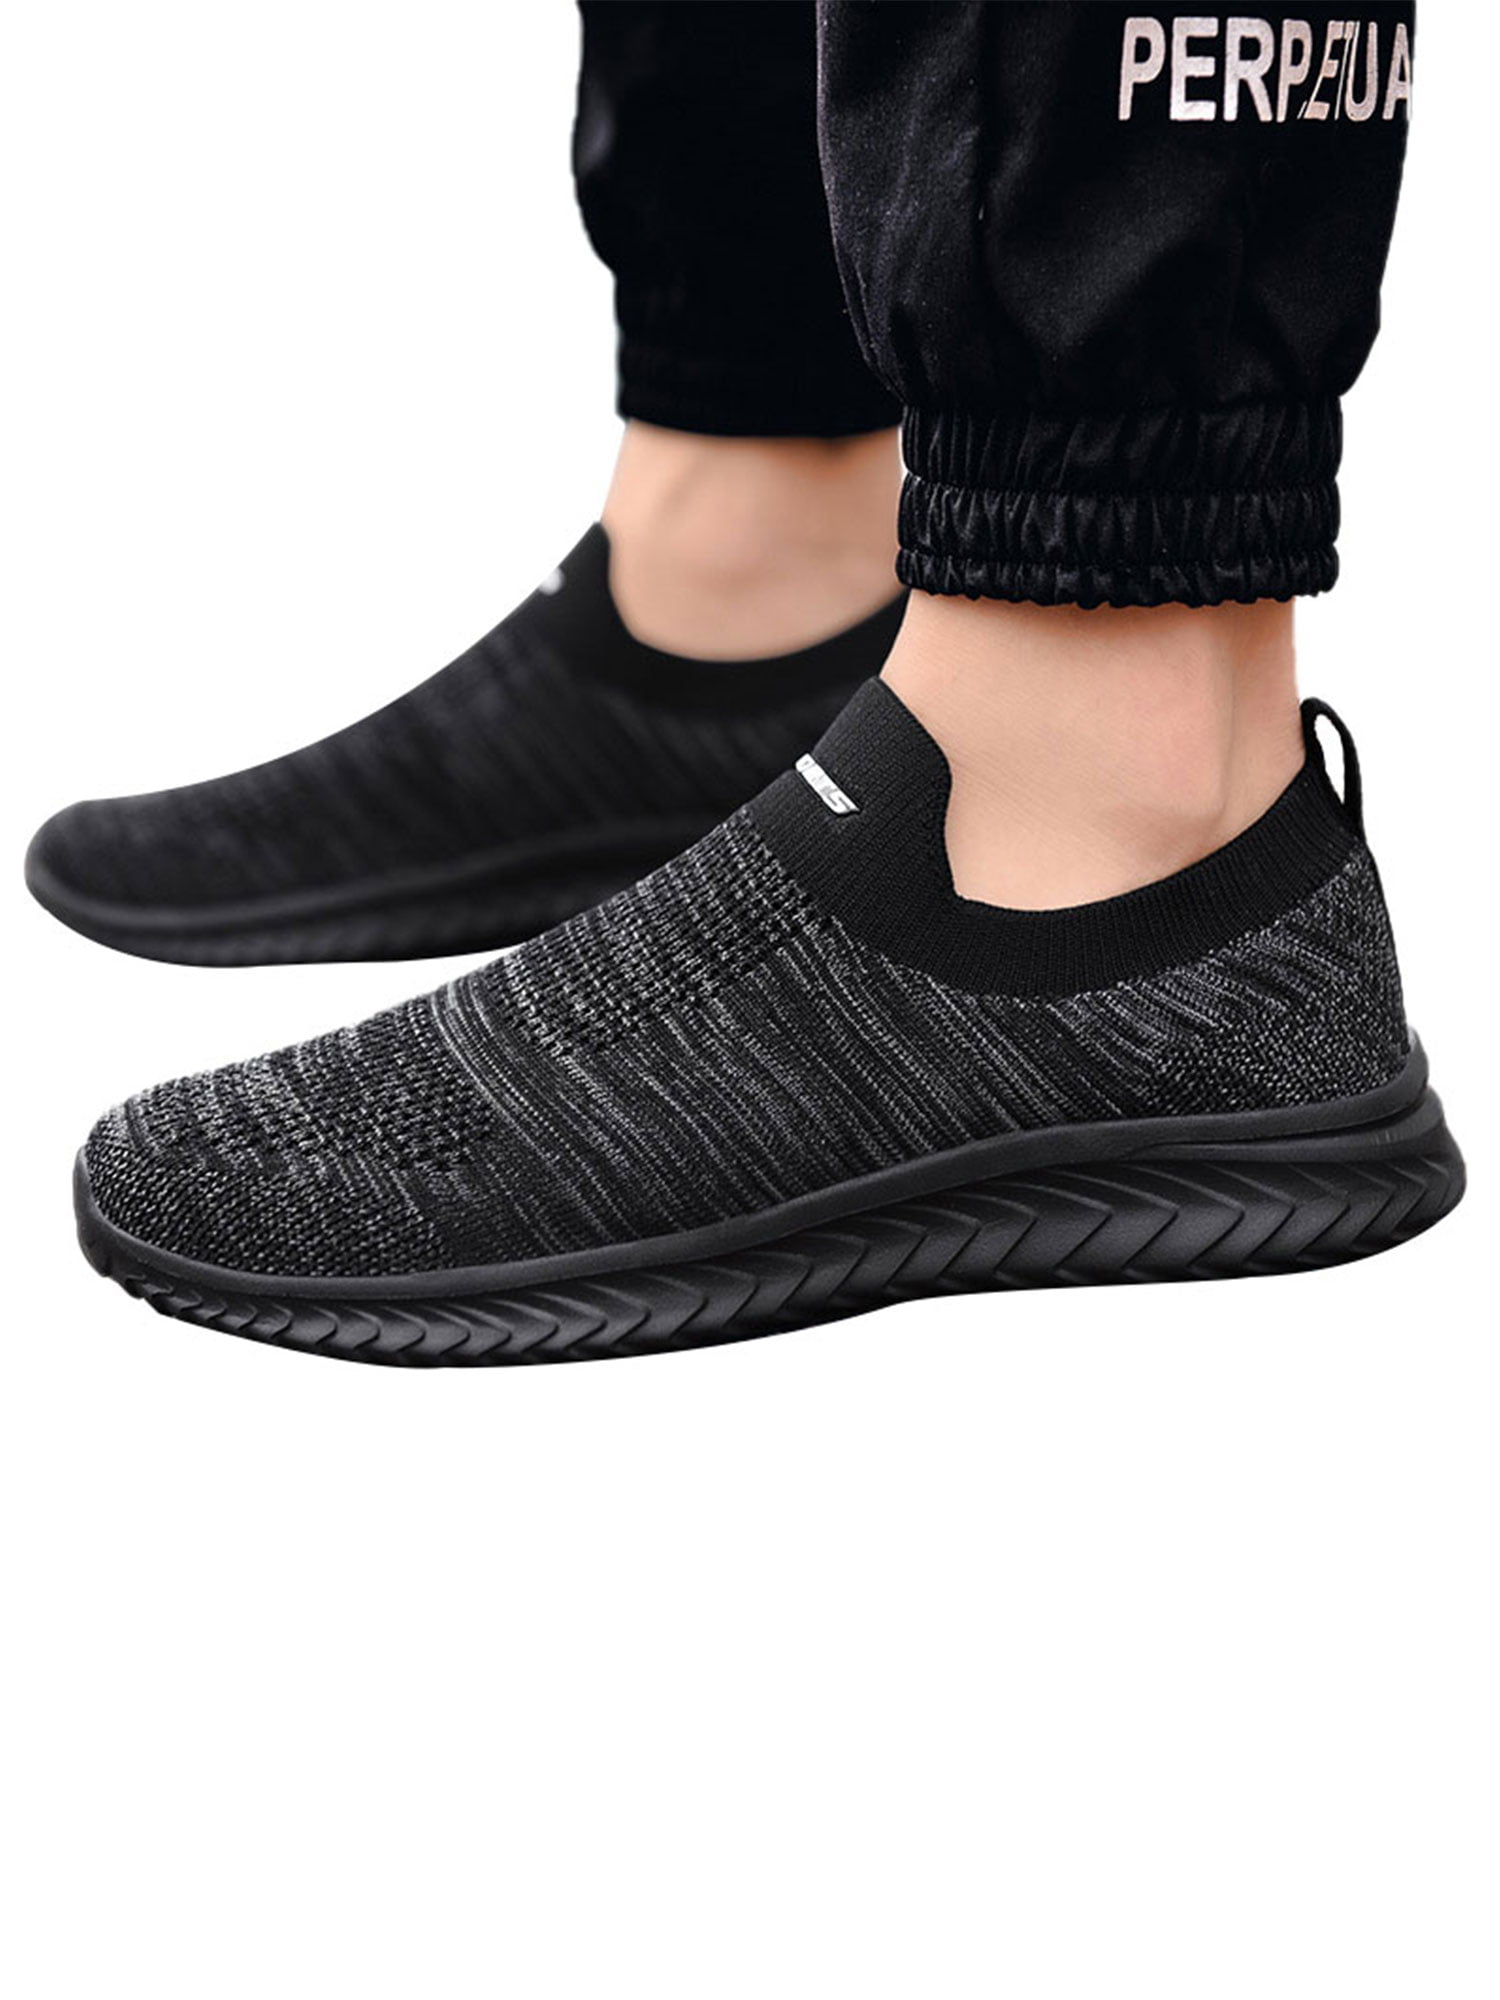 Men's Slip On Walking Shoes Mesh Comfortable Lightweight Shoe Running Sneakers Tennis Breathable Sports Casual Loafers Athletic Sneaker 